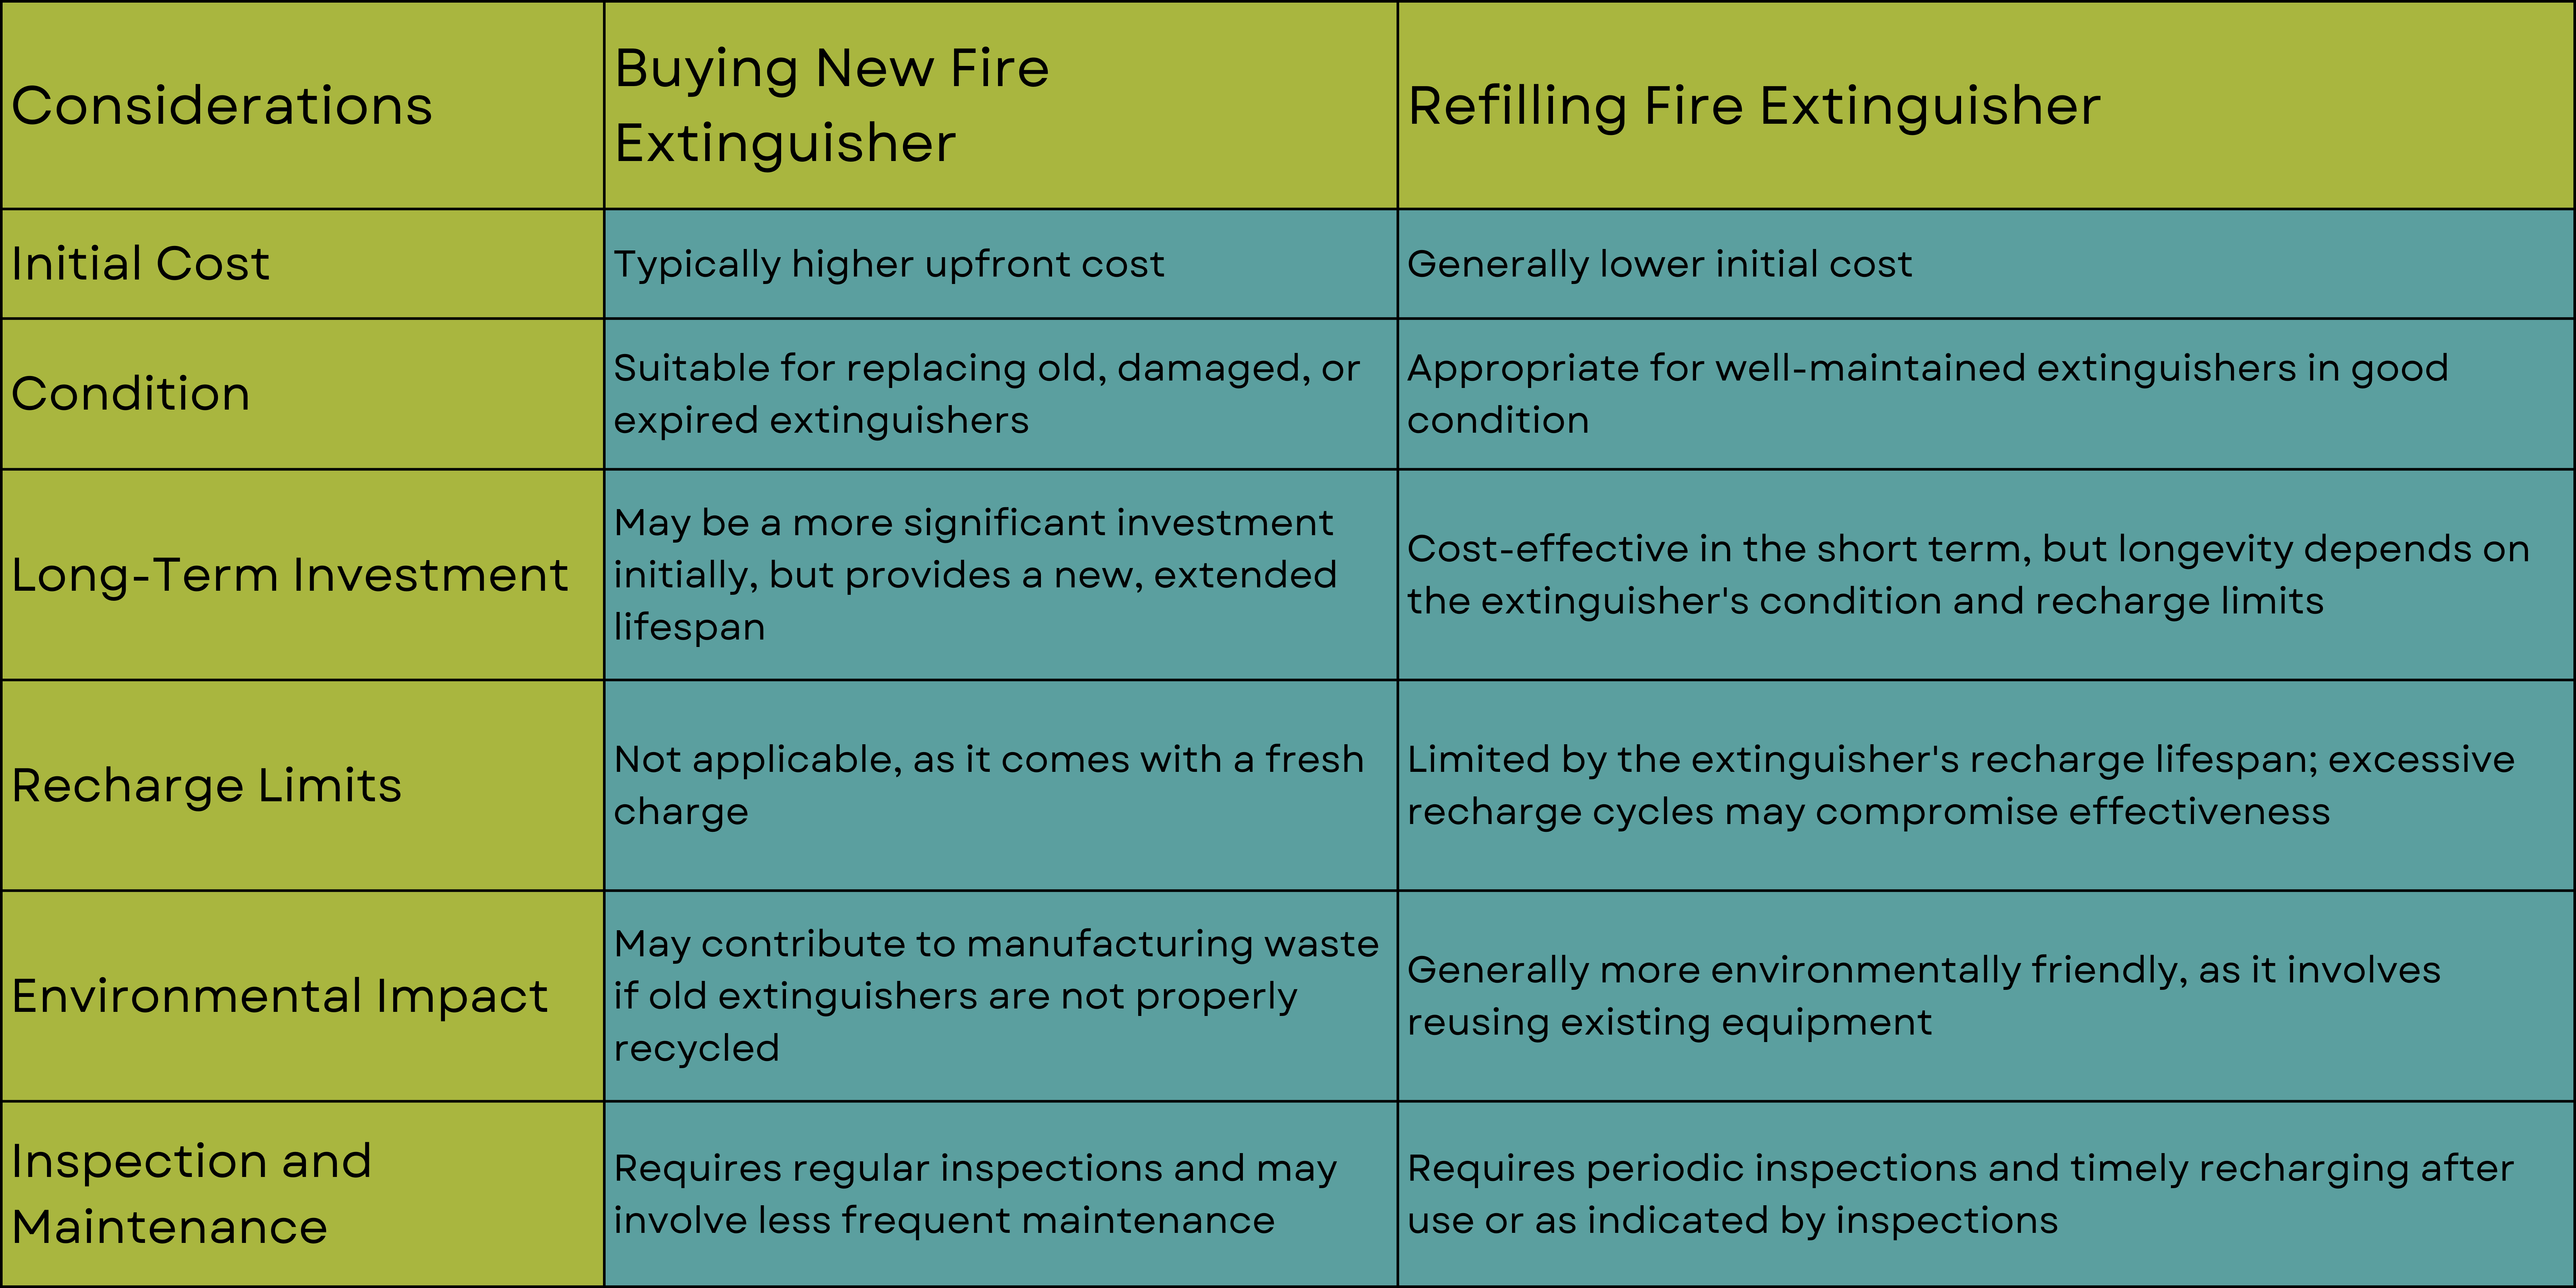 Is it cheaper to recharge a fire extinguisher or buy a new one?